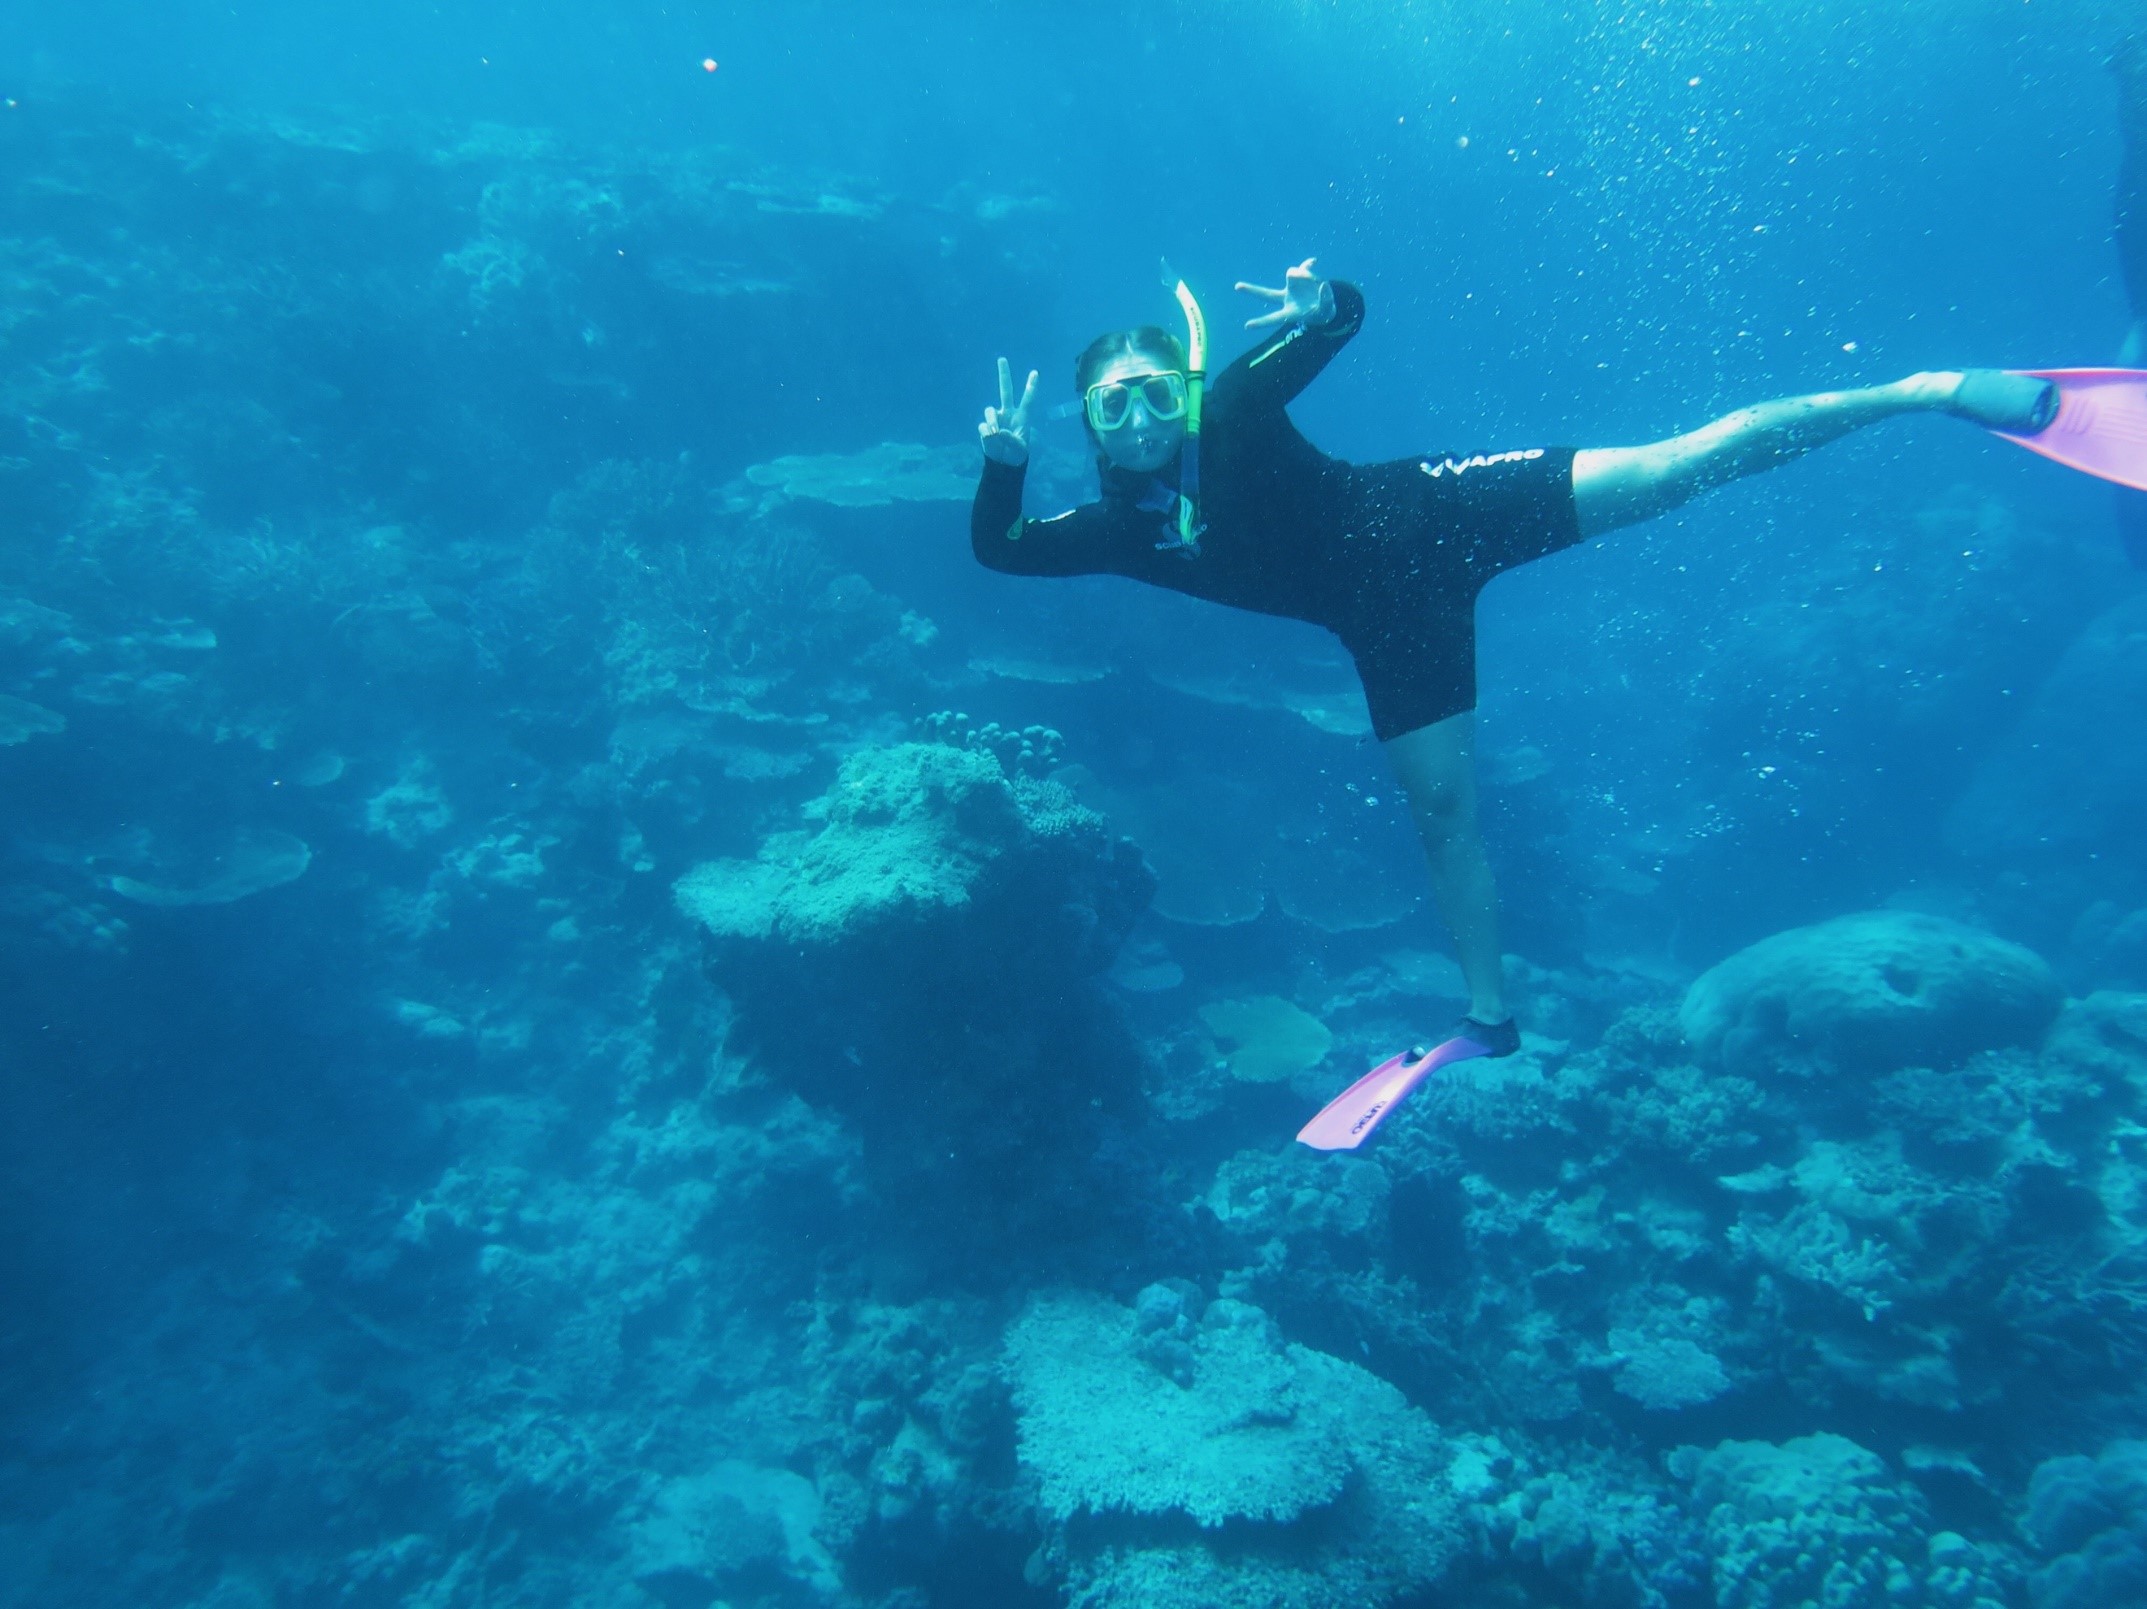 Price snorkeling at the Great Barrier Reef